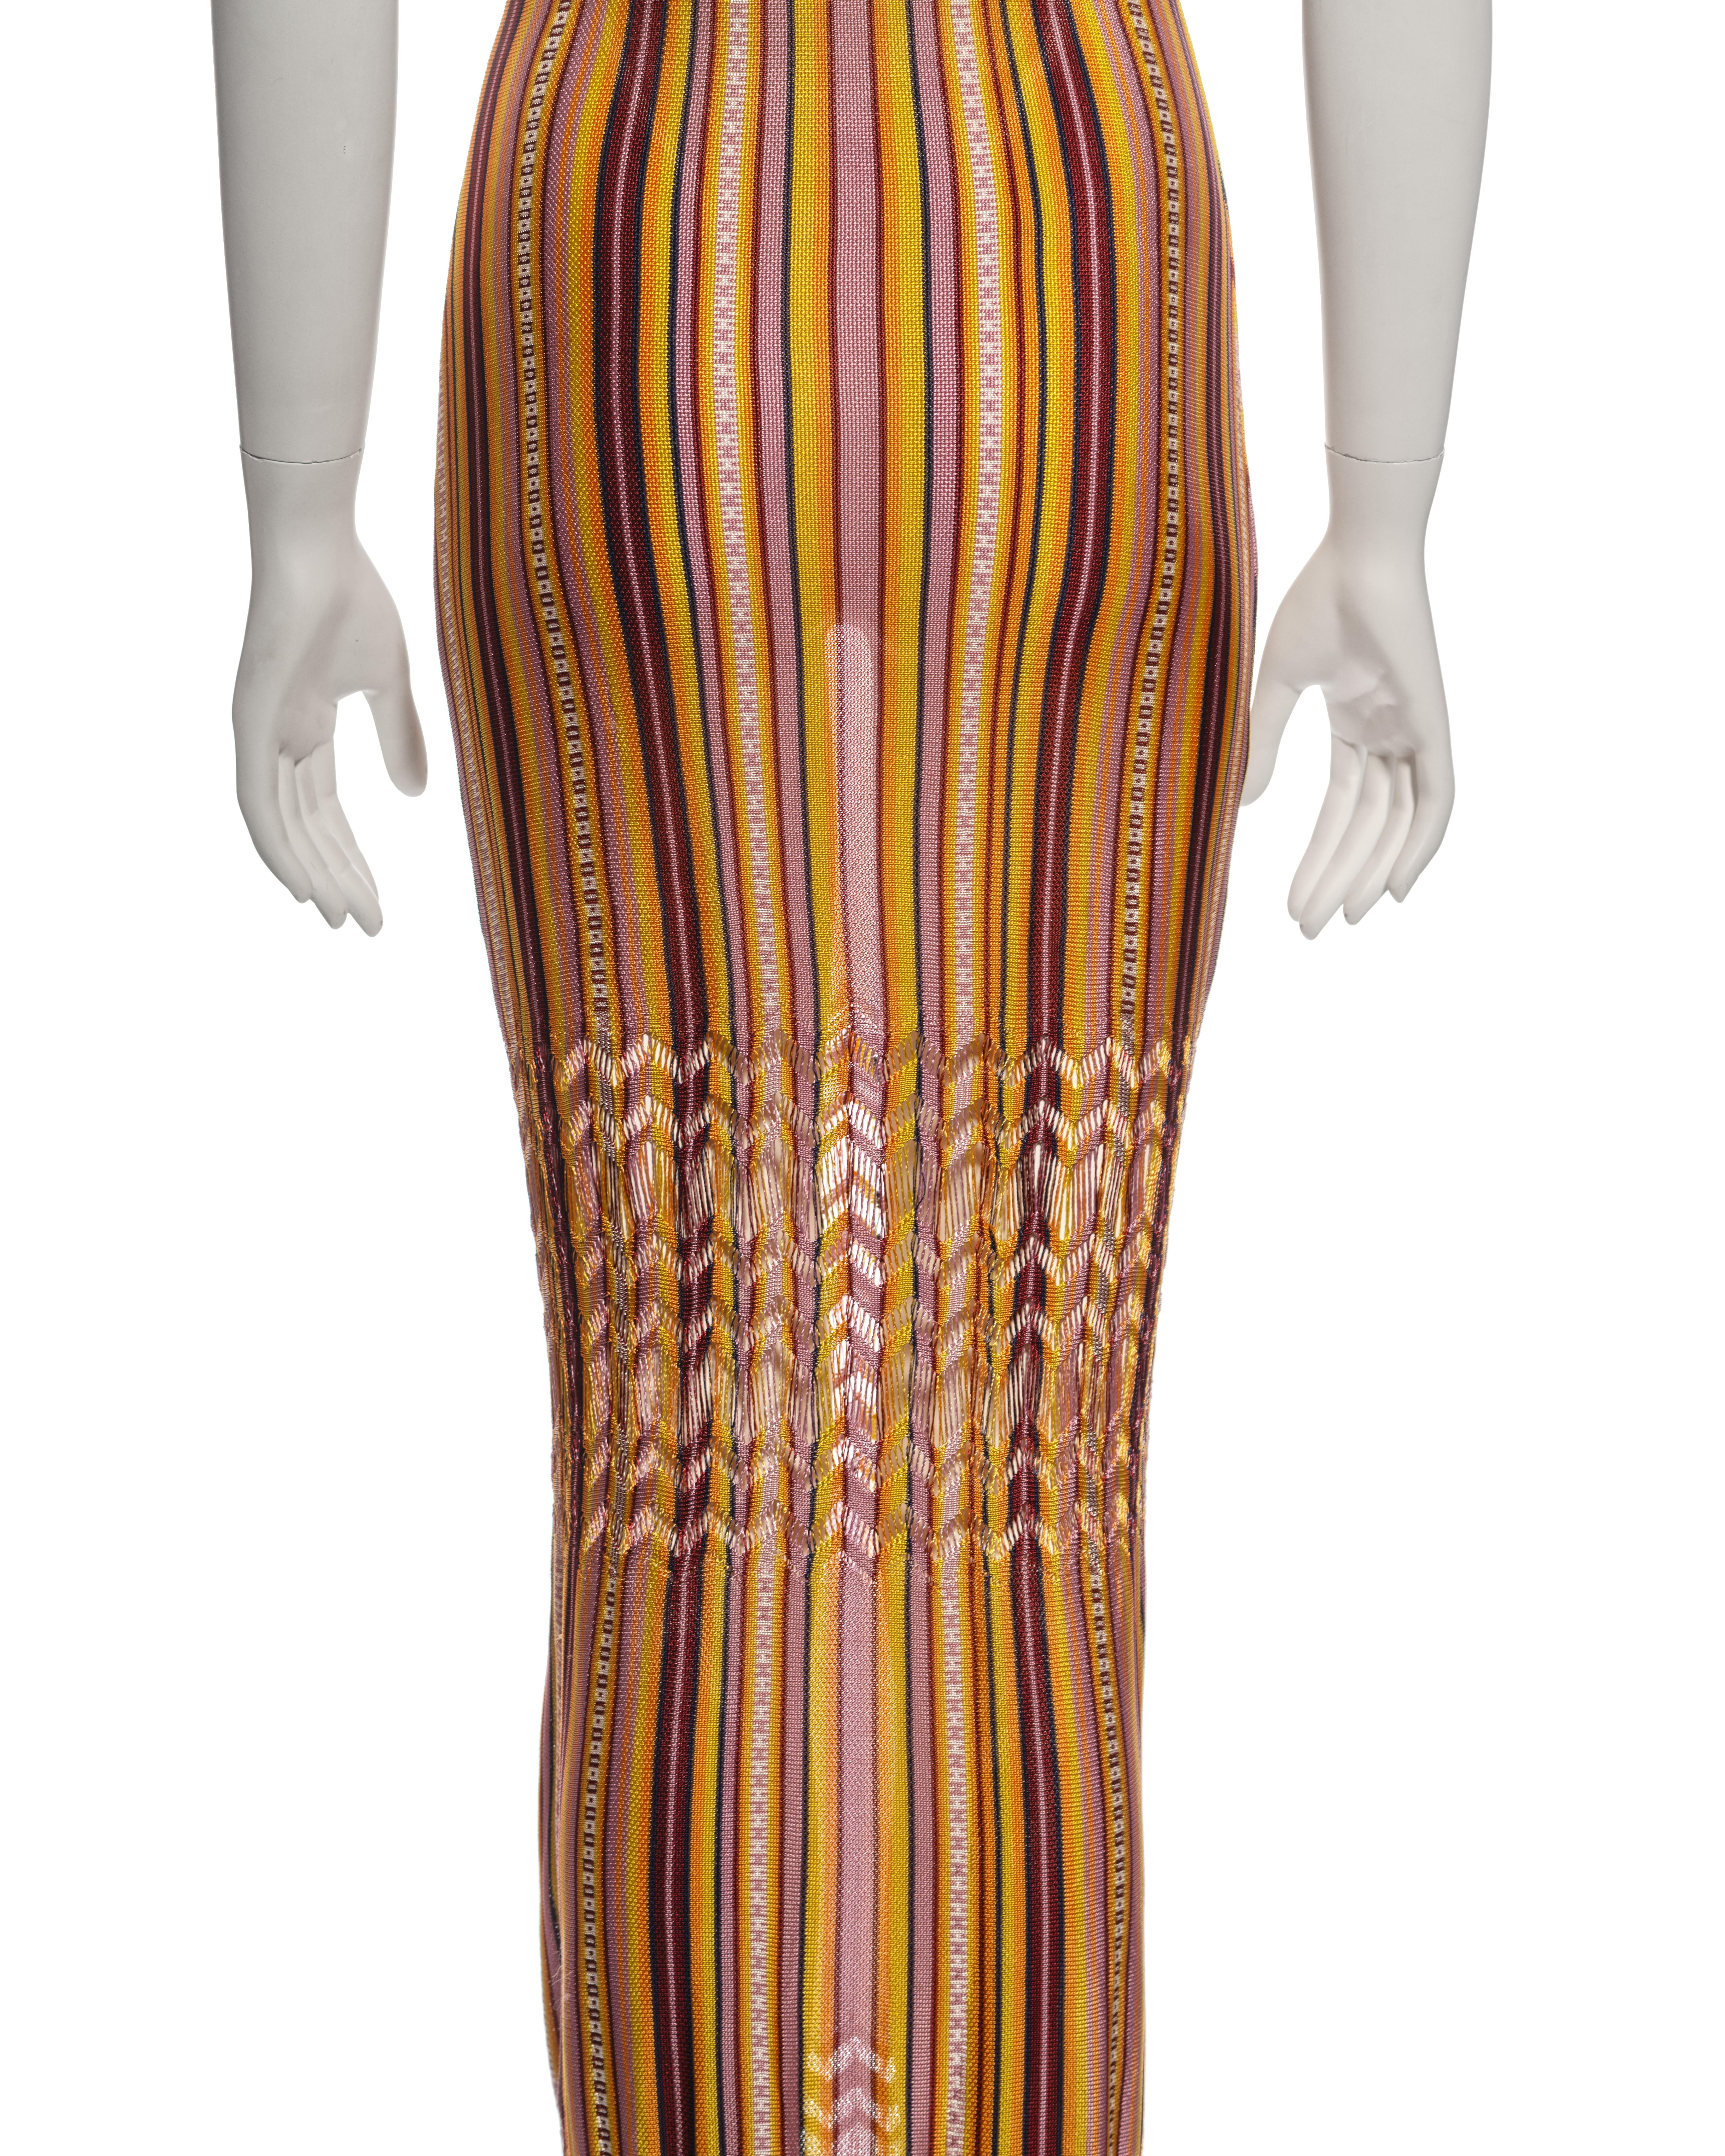 Christian Dior by John Galliano Striped Knit Maxi Dress and Cardigan, ss 2002 For Sale 10